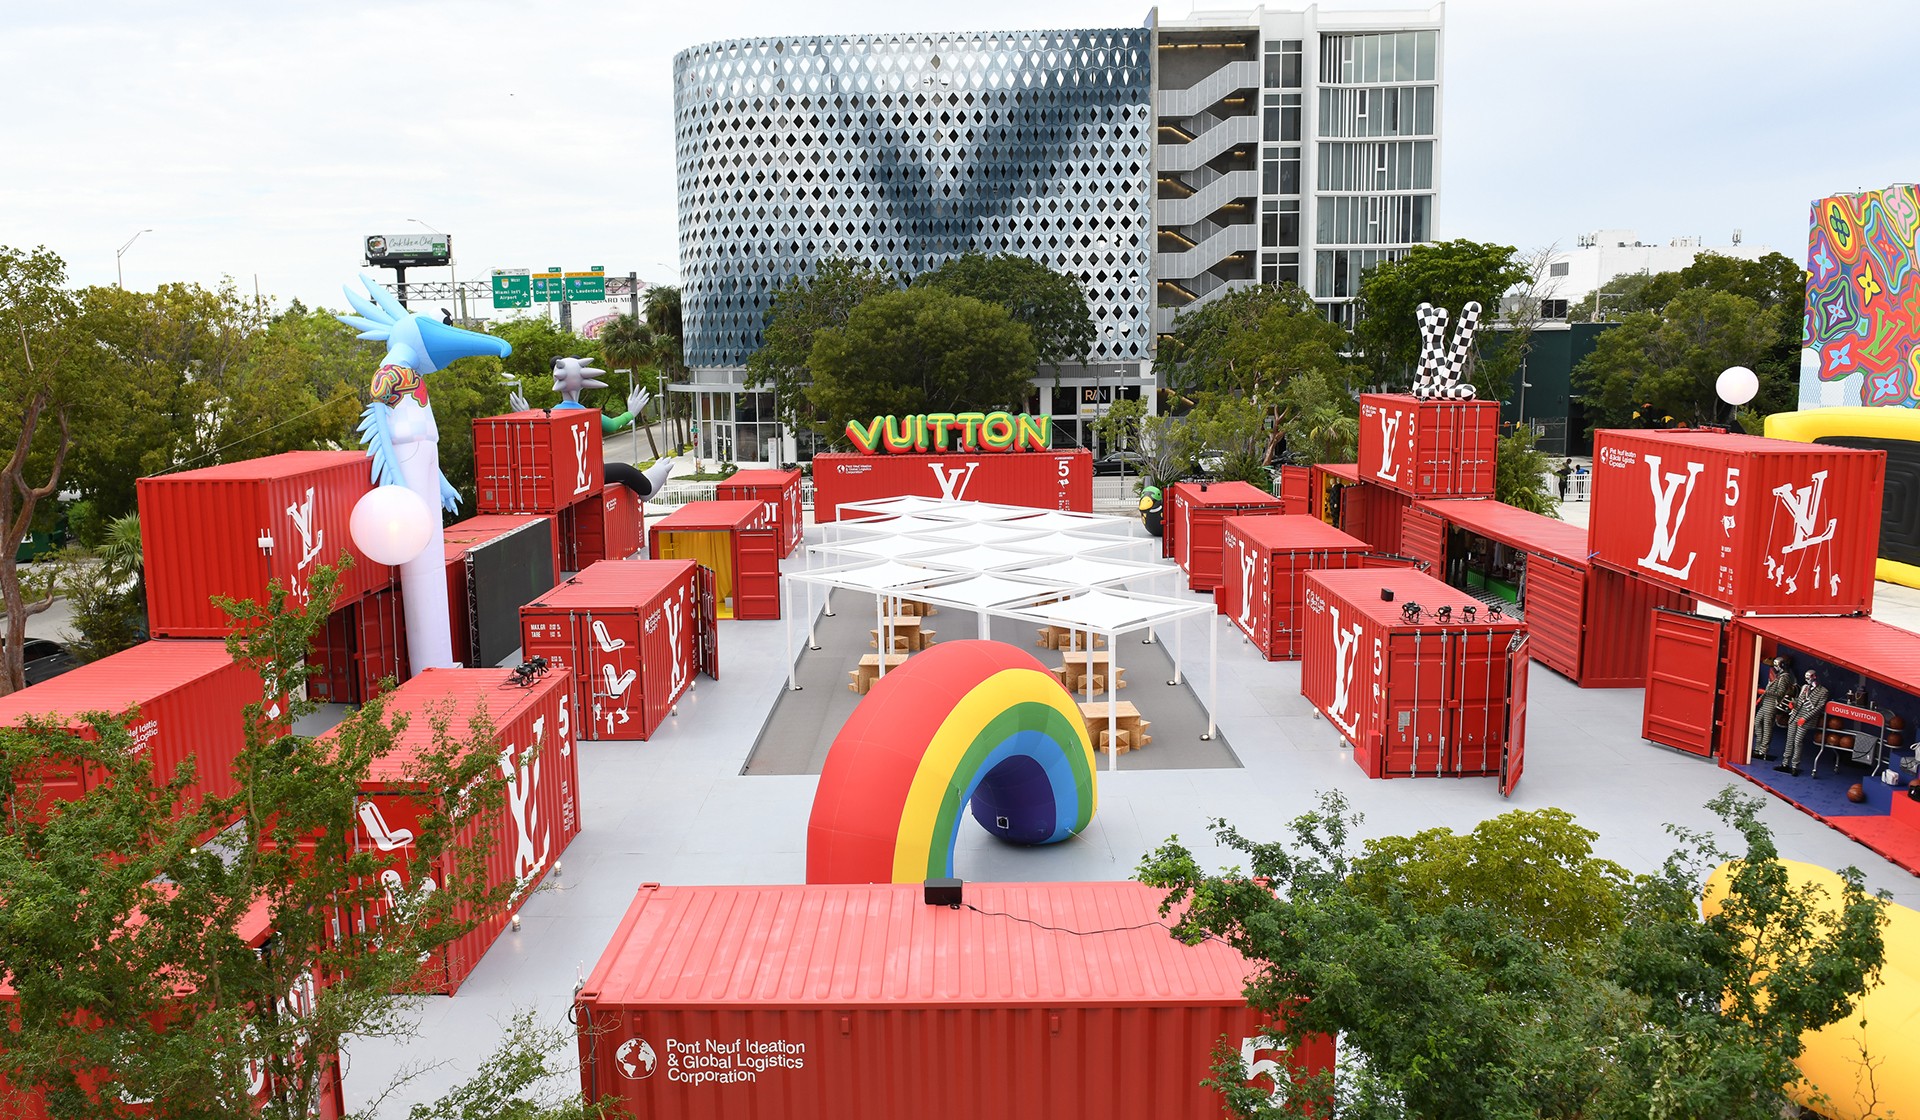 Louis Vuitton Mens Temporary Residency at Miami Design District  Miami  Design District